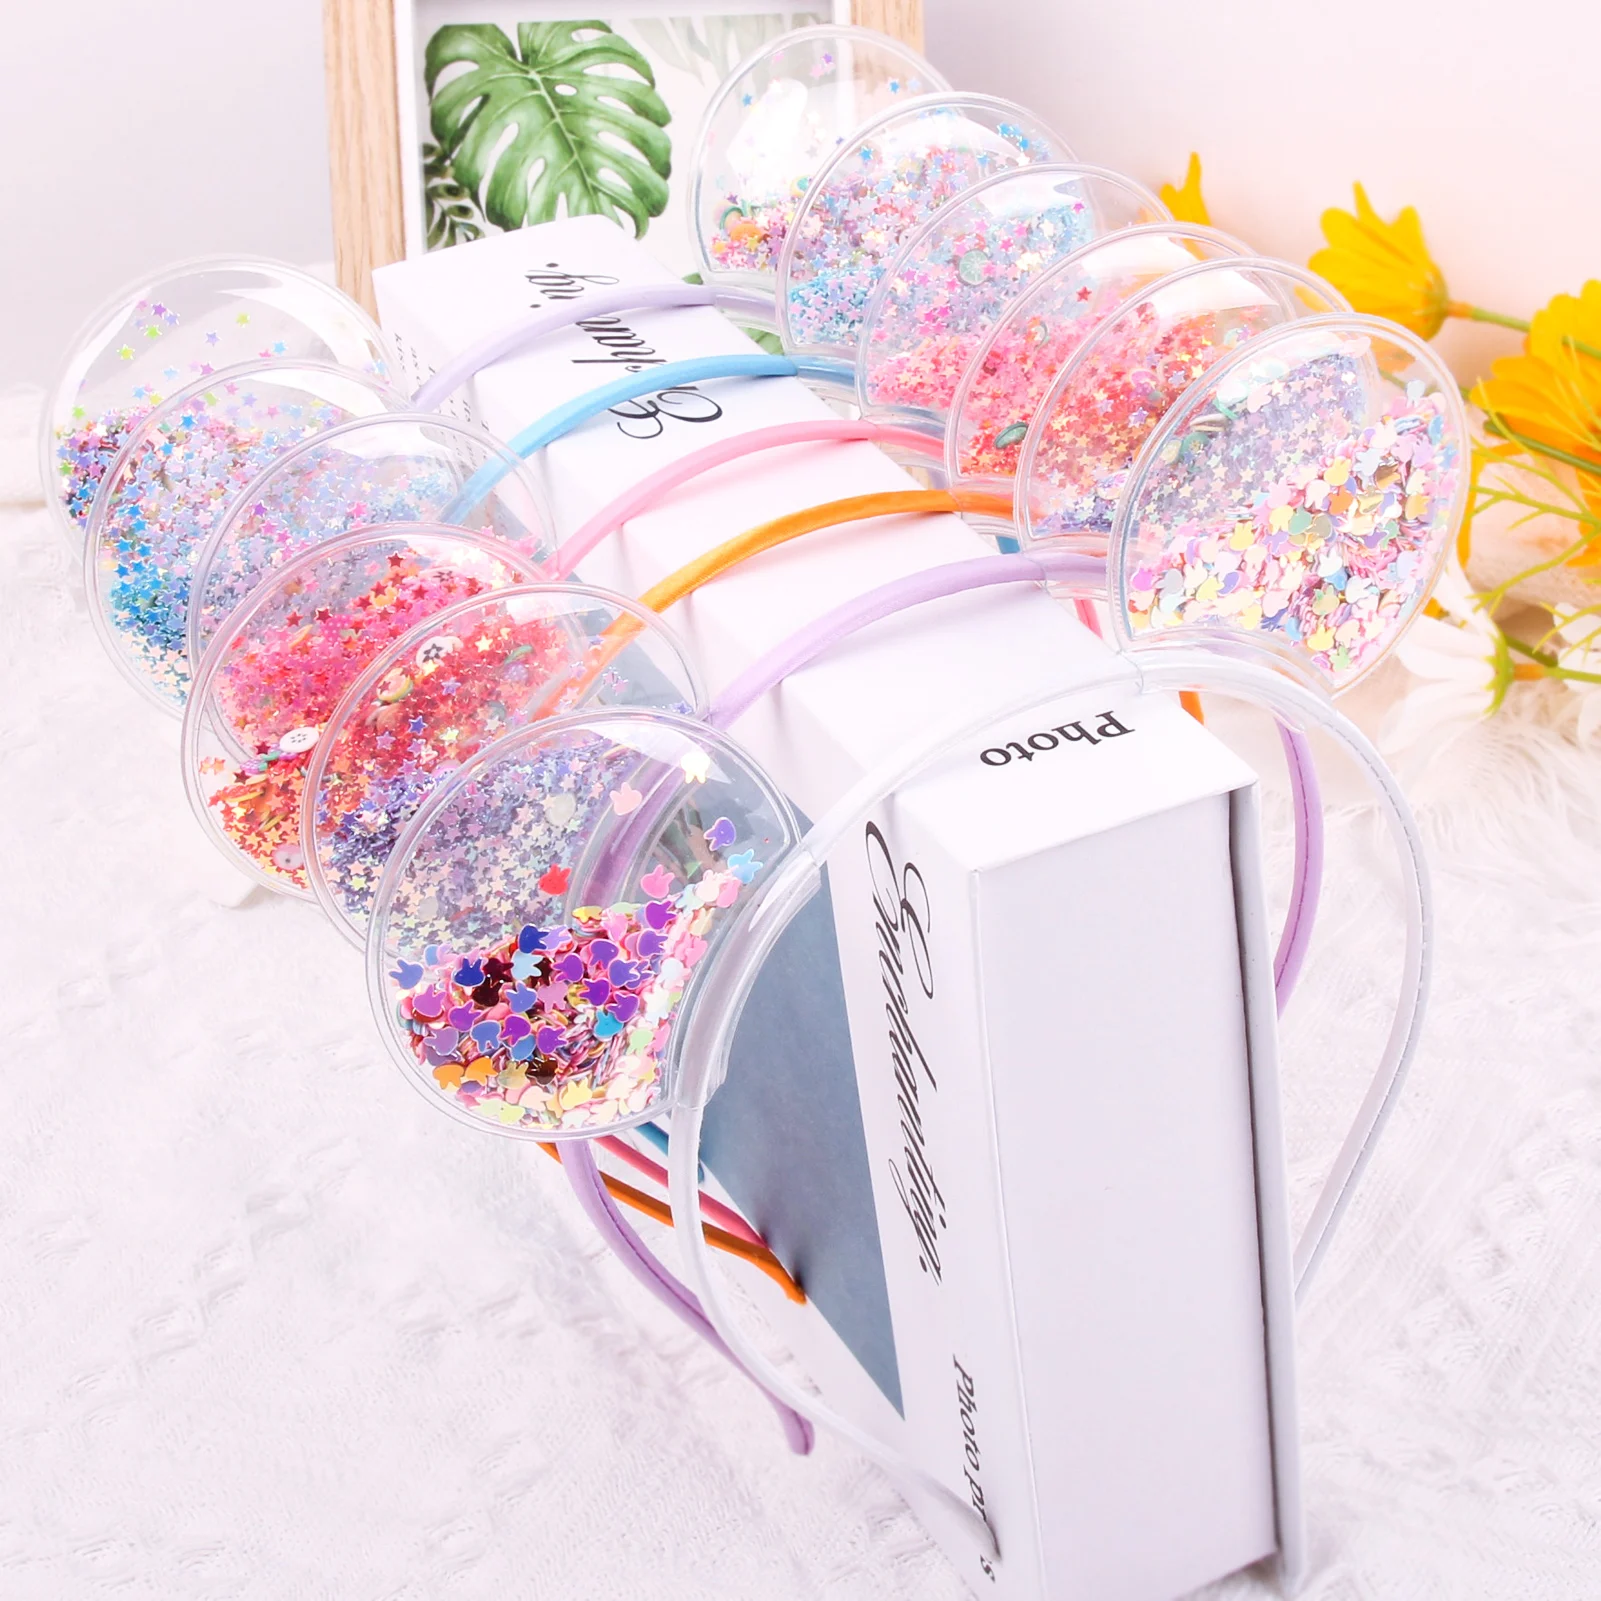 Candygirl Transparent Cat Ears Headband Quicksand Bows Hair Hoop Cute Colorful Sequins Hairbands Girls Princess Hair Accessories 2023 candygirl new lace shiny sequins cat ears cute children s hairband girl princess birthday party hair accessories 머리끈